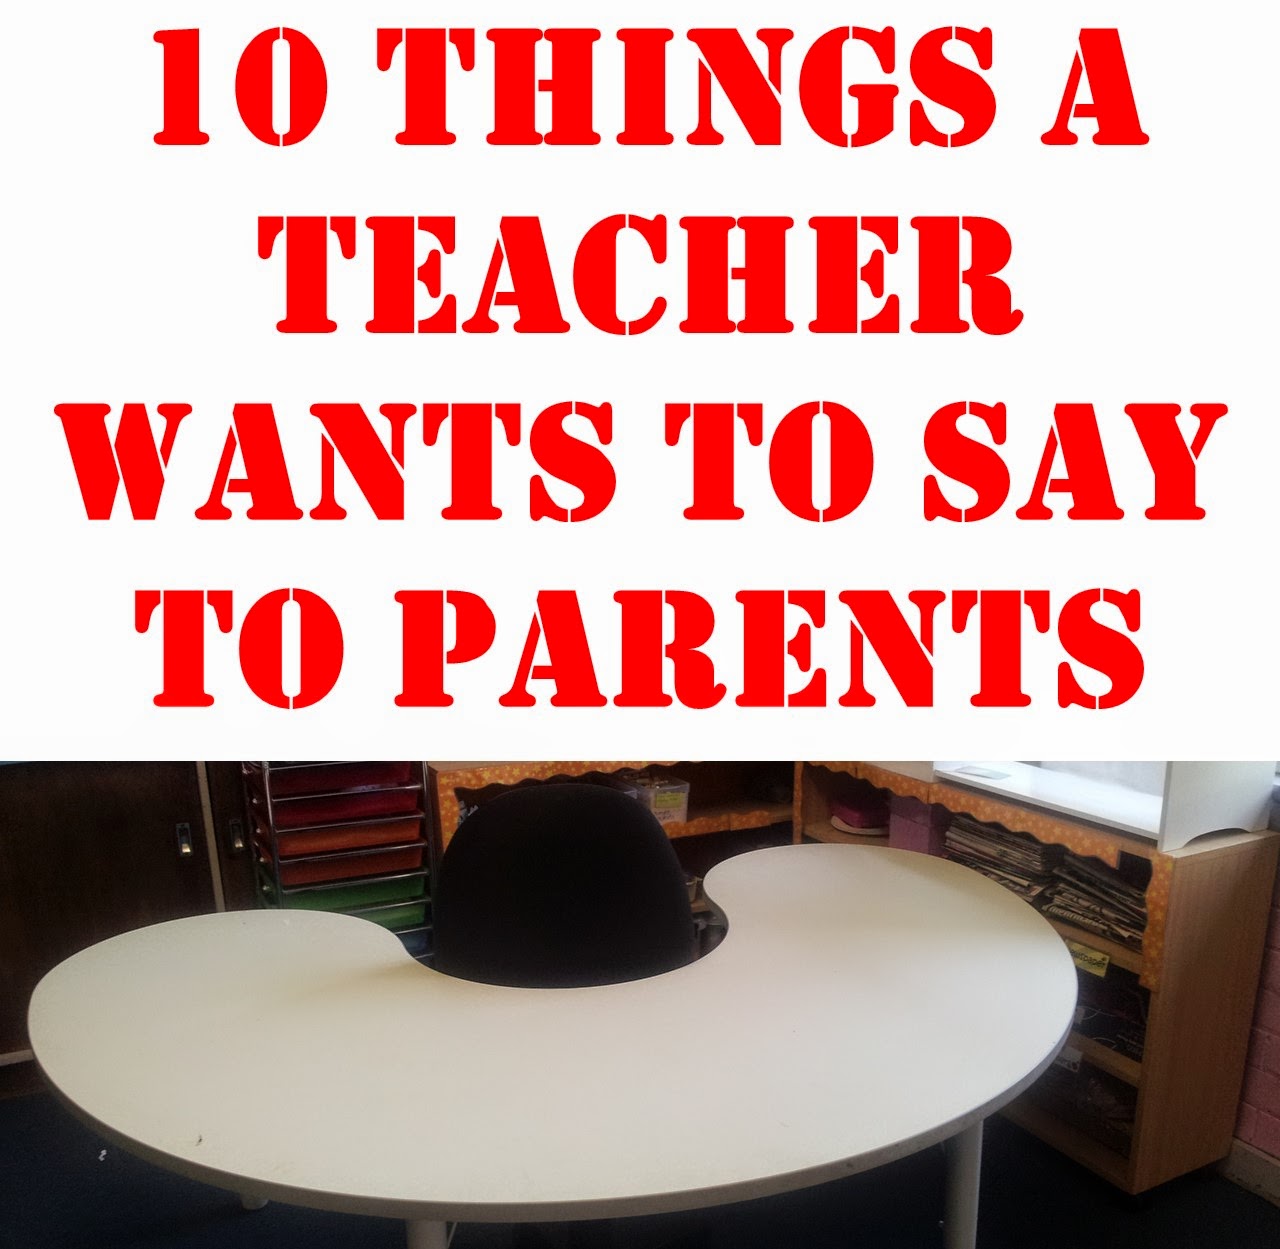 MrsAmy123: 10 Things a Teacher Wants to Say to Parents